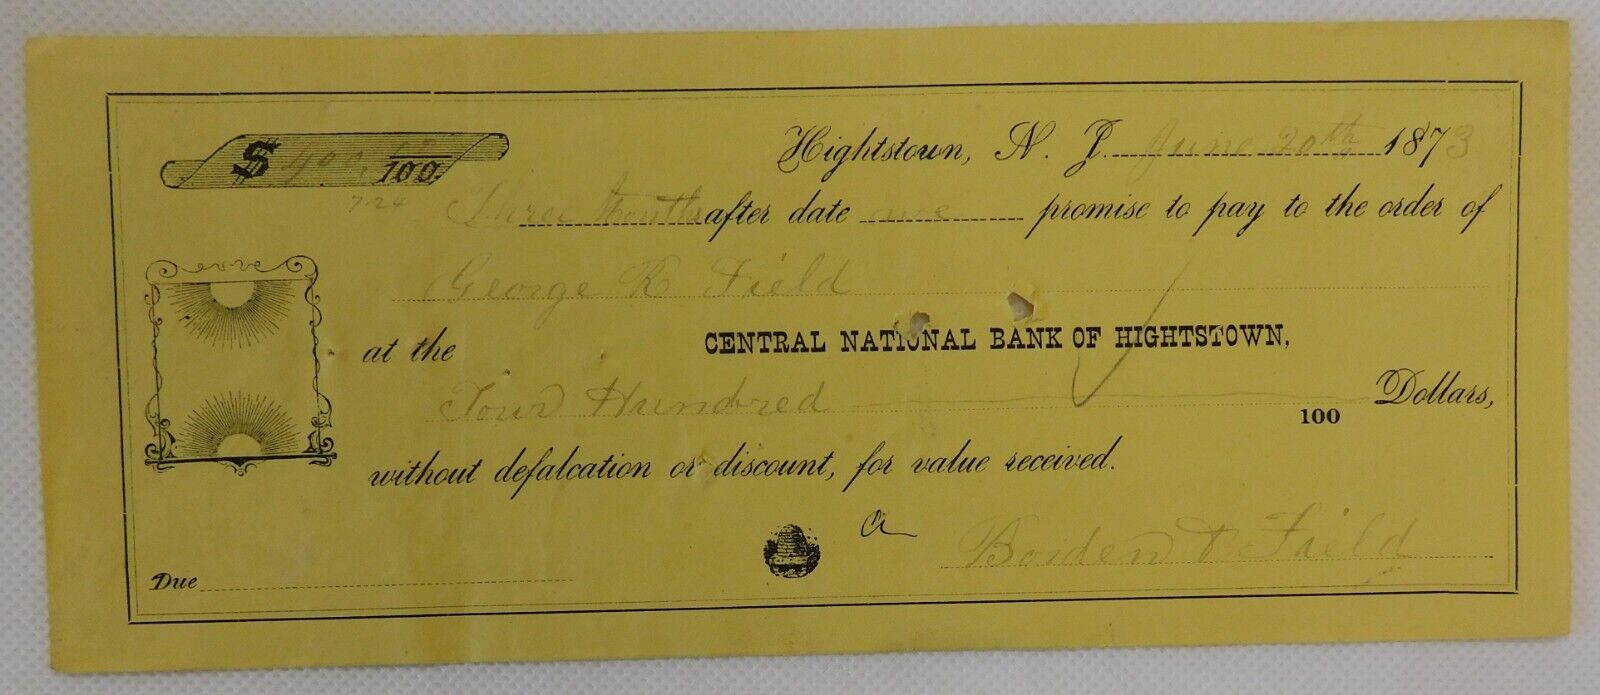 Central National Bank of Highstown Cancelled Check June 20, 1873